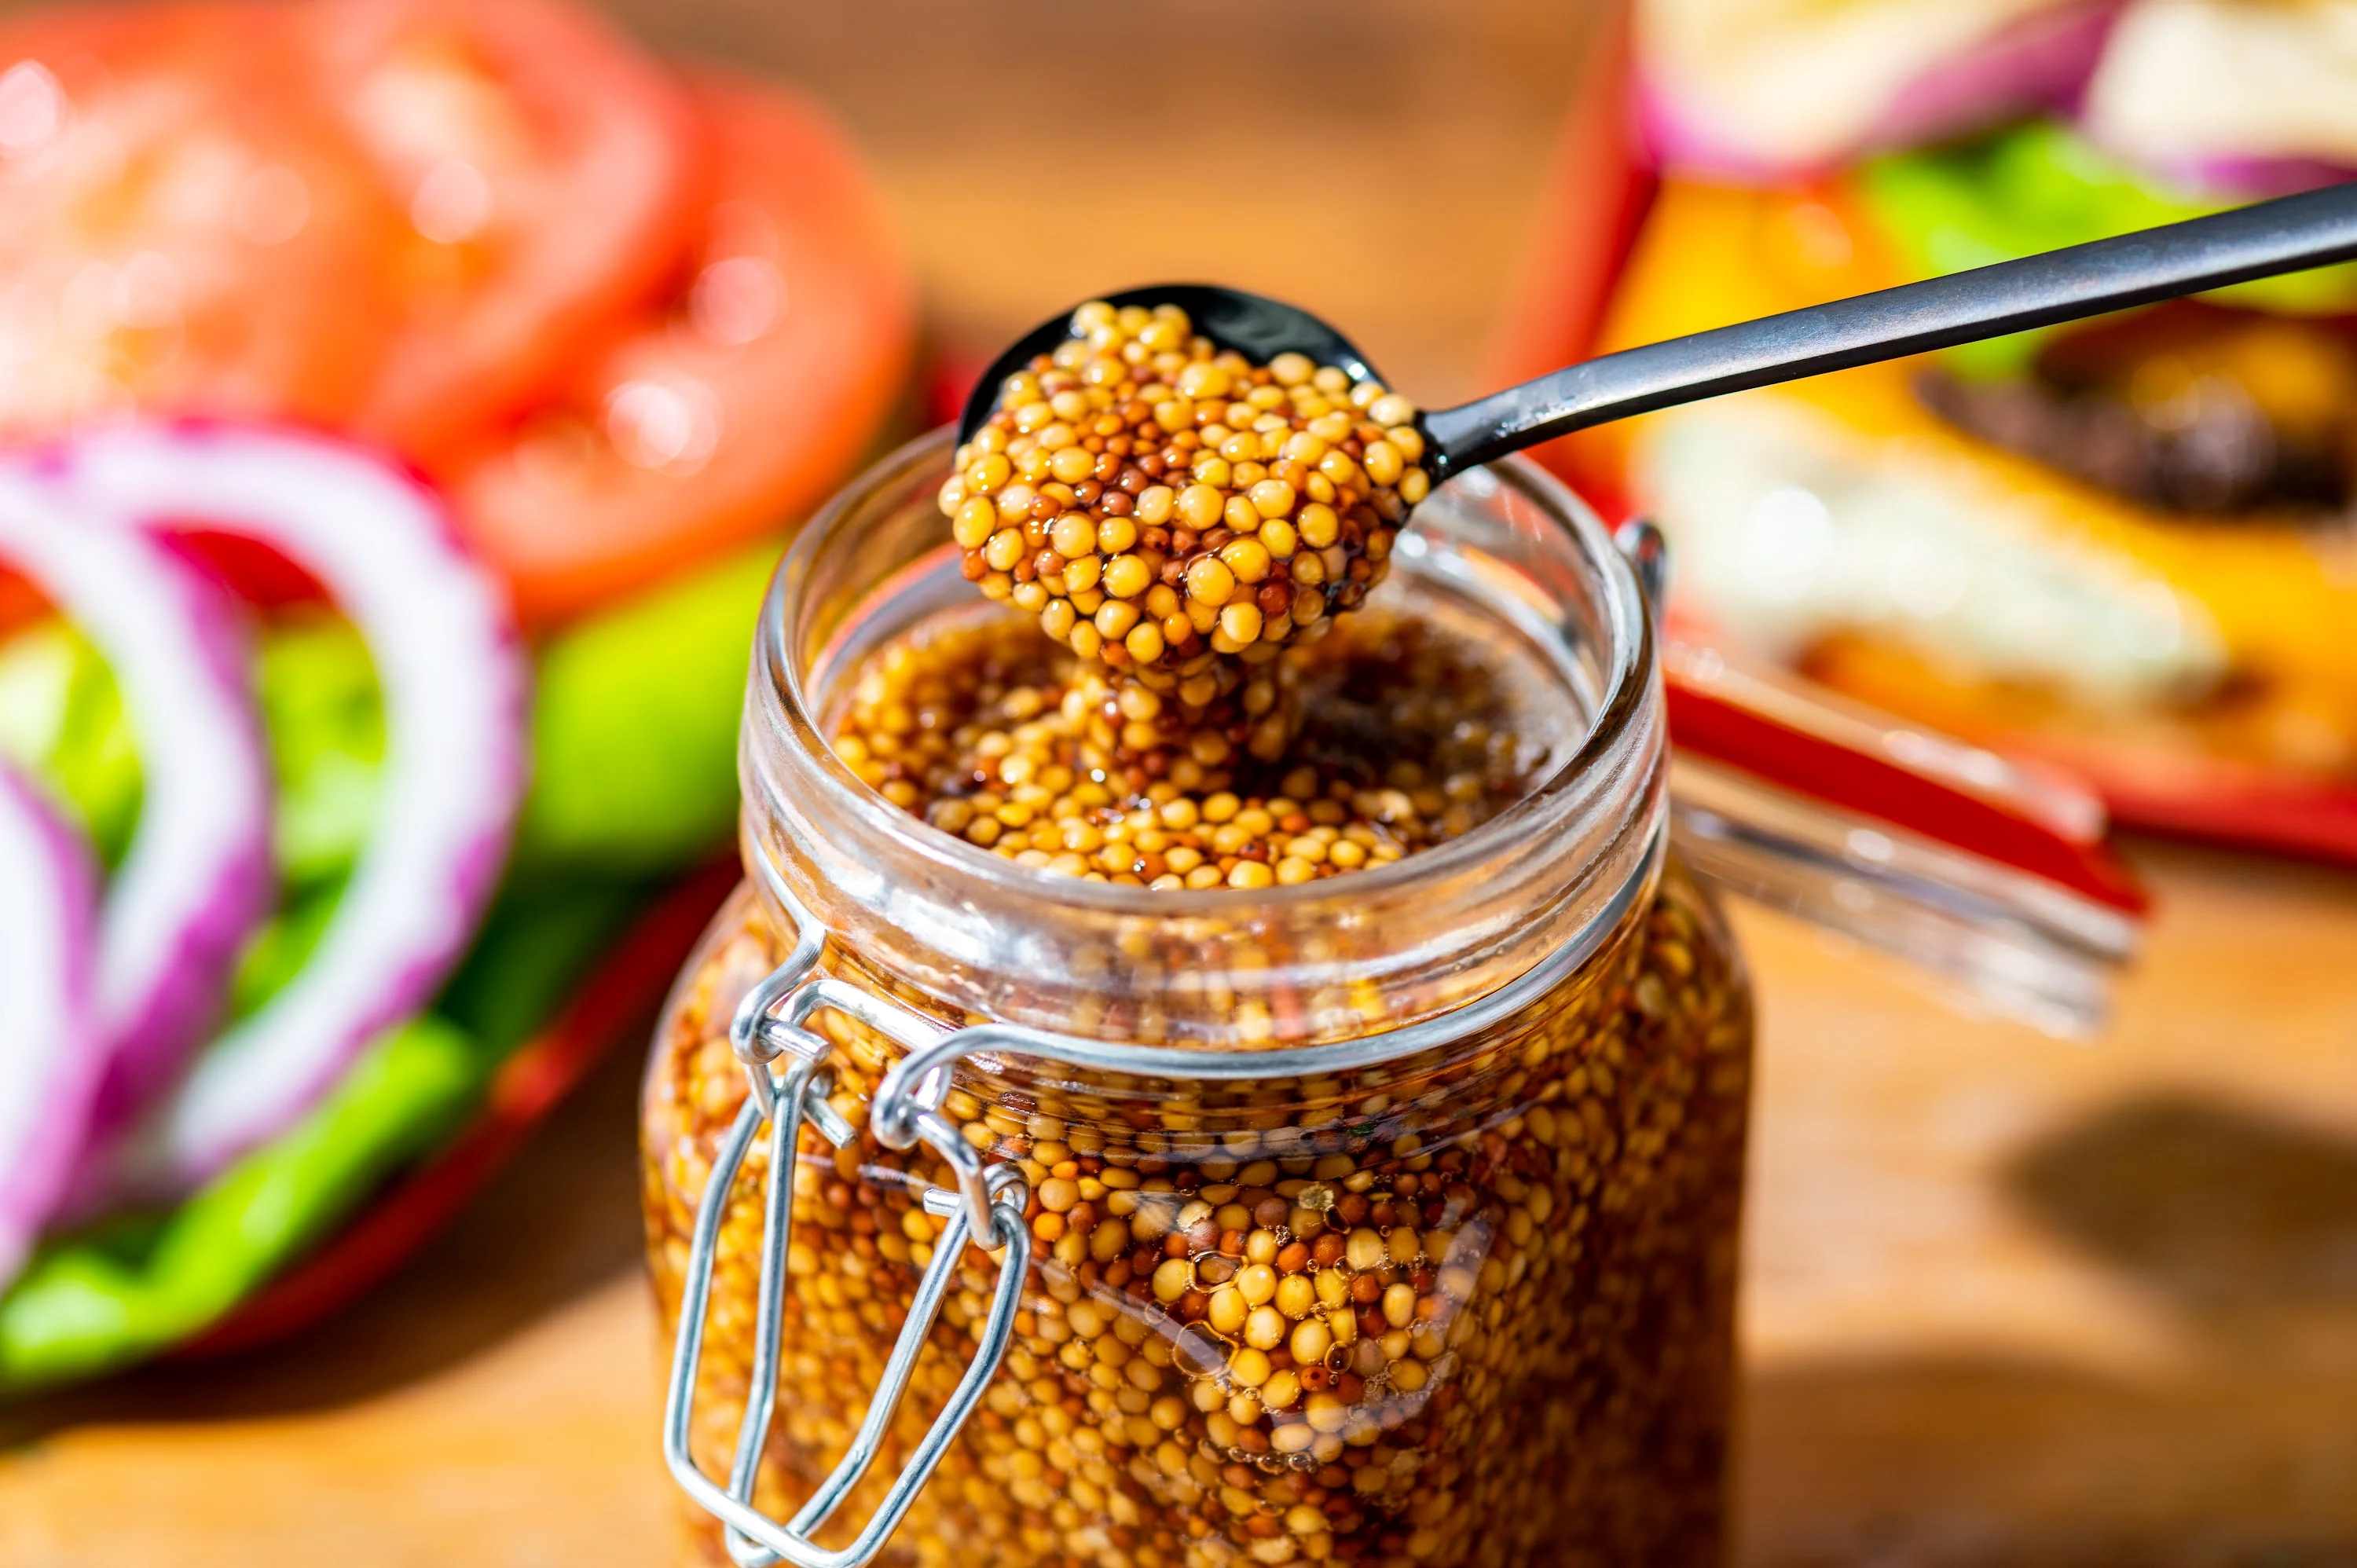 Where To Buy Mustard Seeds